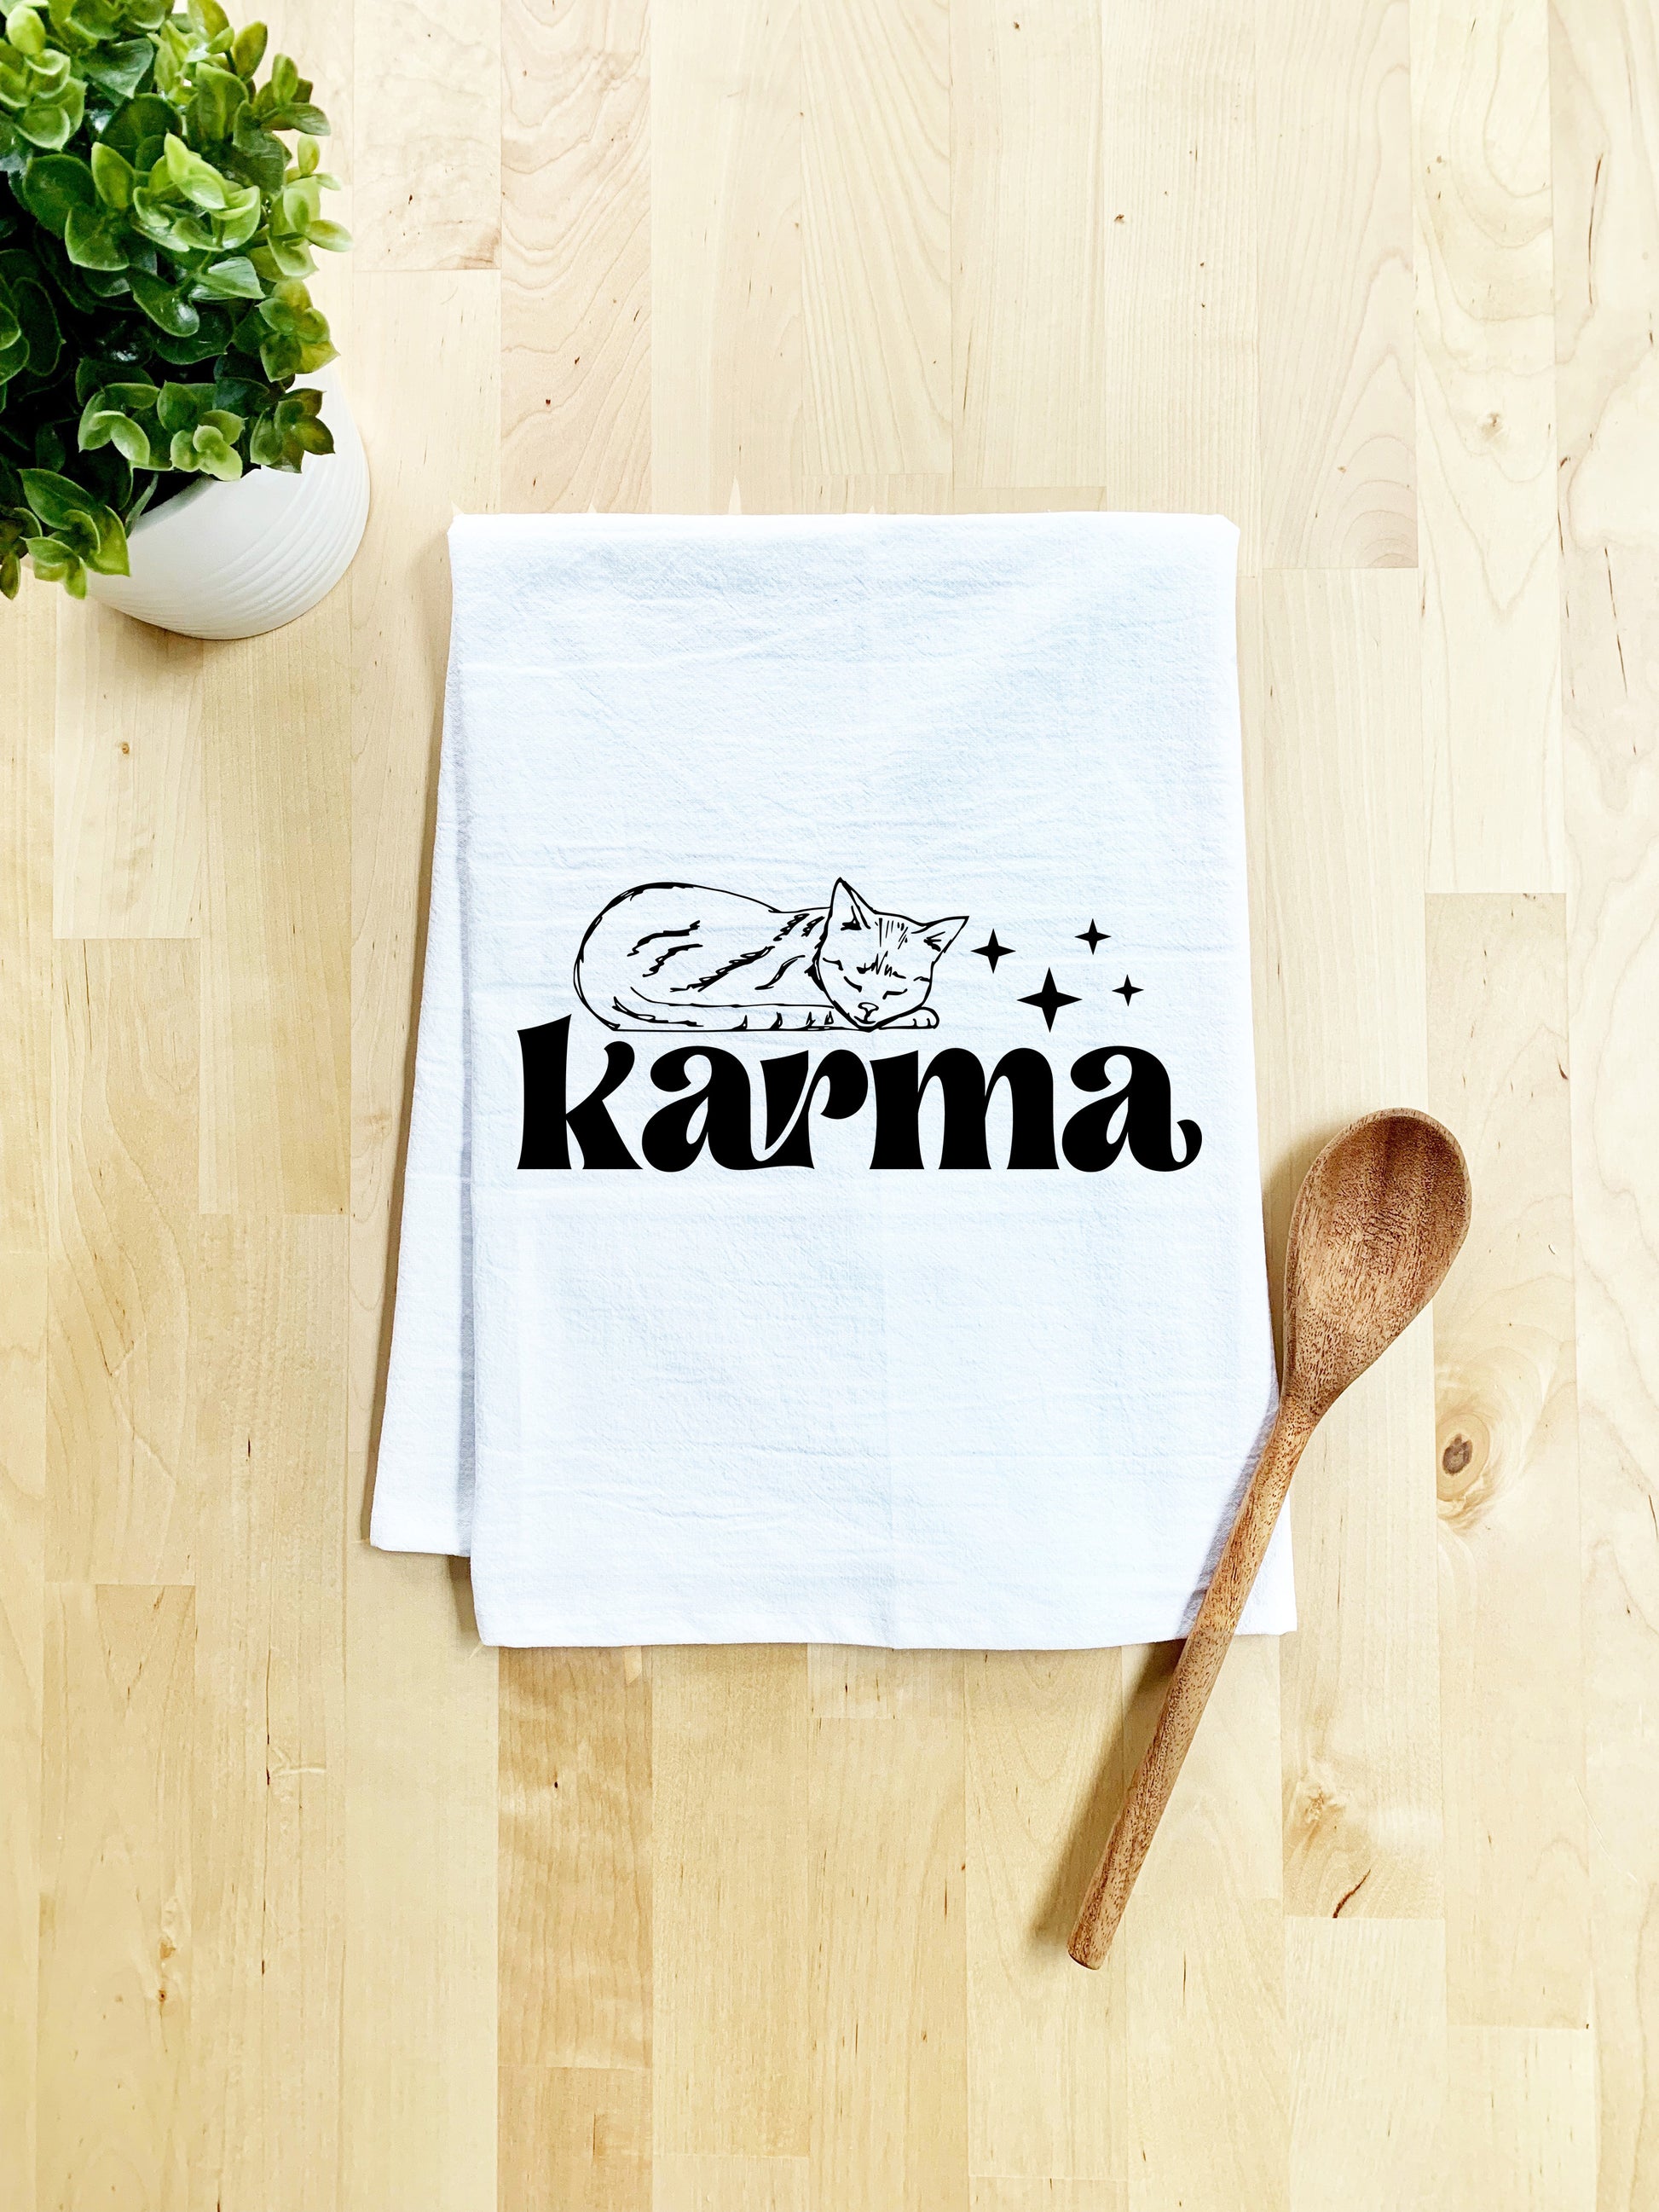 a tea towel with the word kazma on it next to a wooden spoon